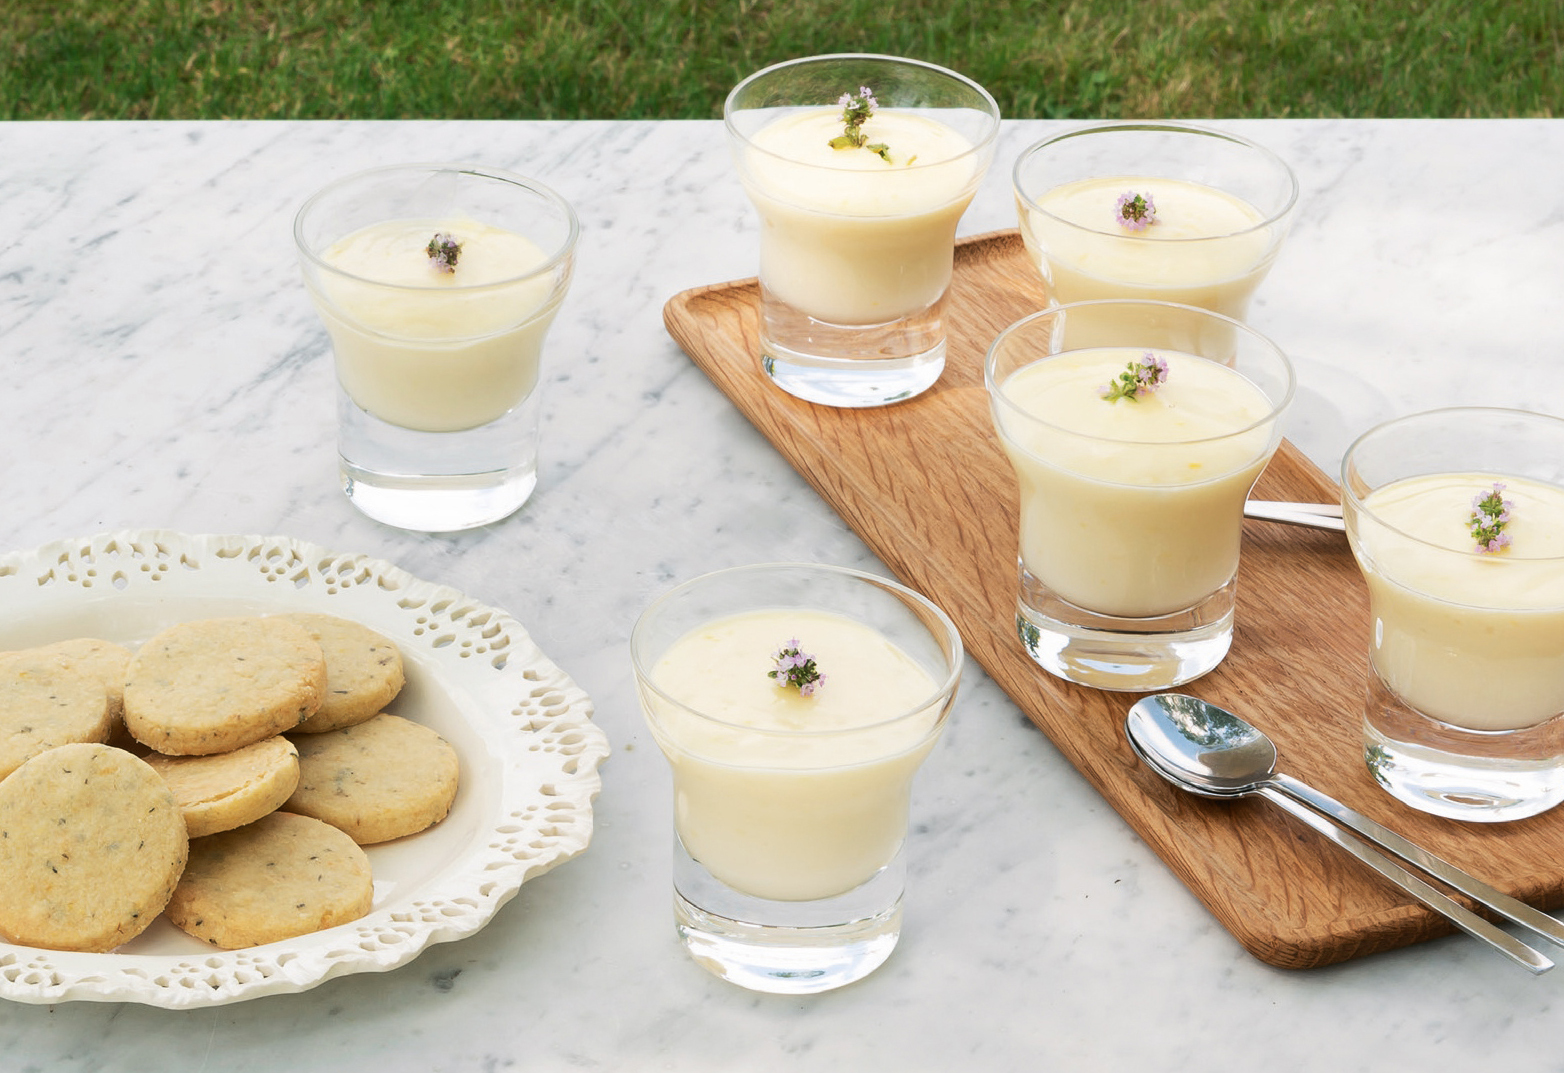 Lemon posset with thyme shortbread. Photography by Gilbert McCarragher